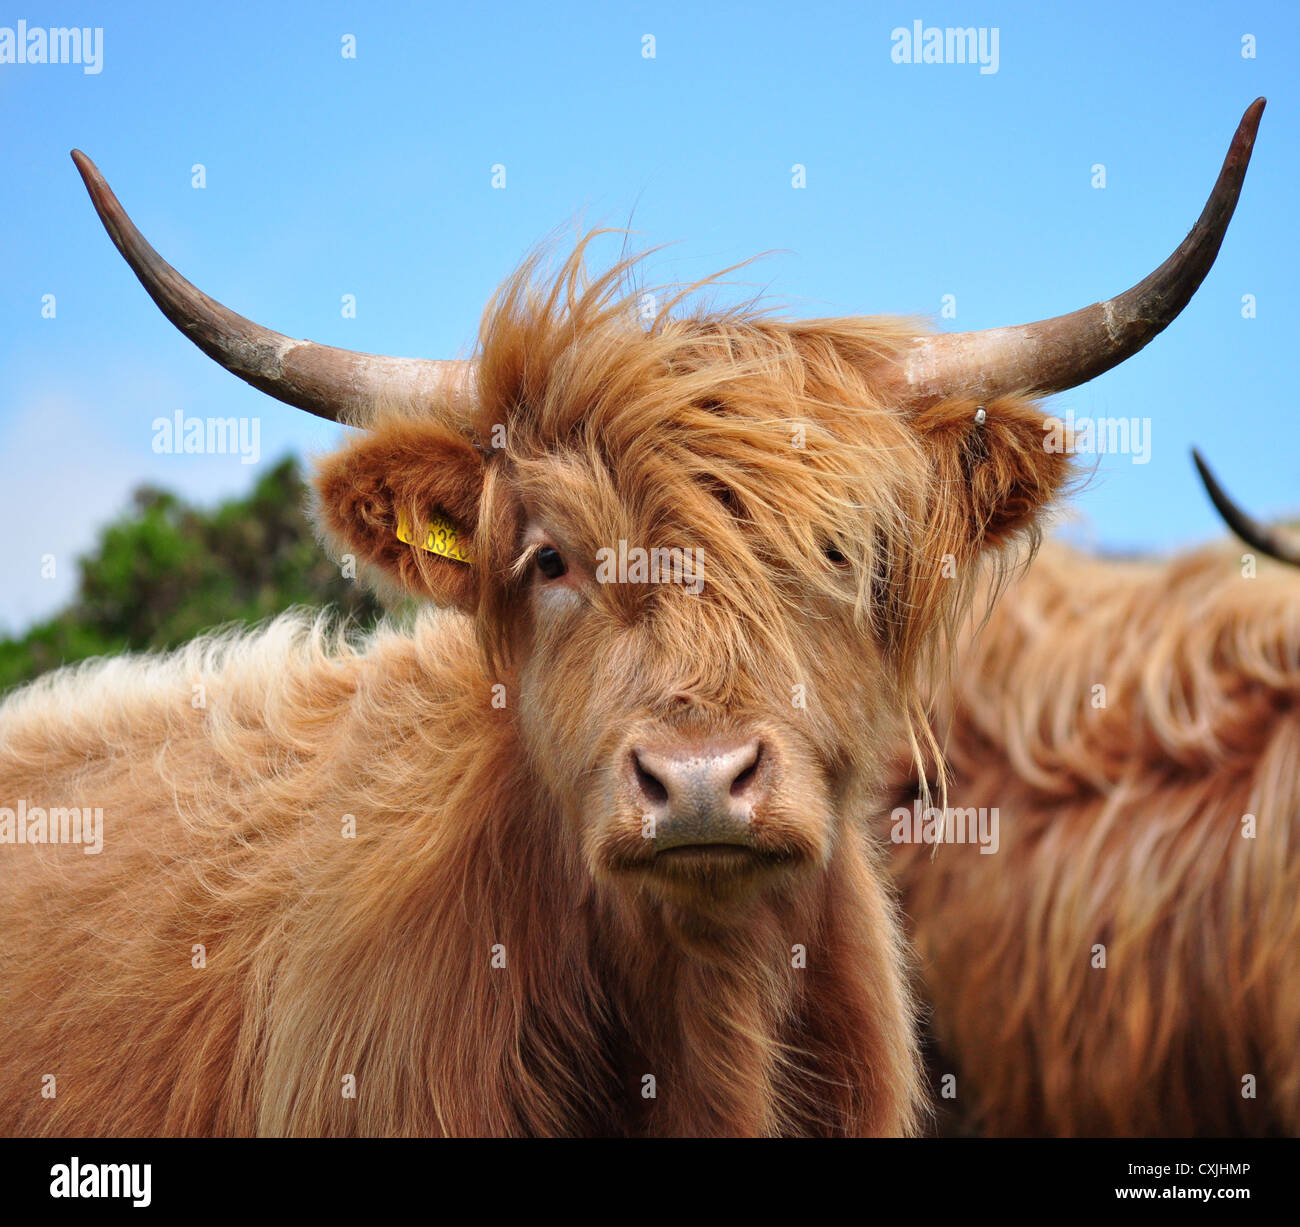 Scottish highland cattle head and horn Stock Photo